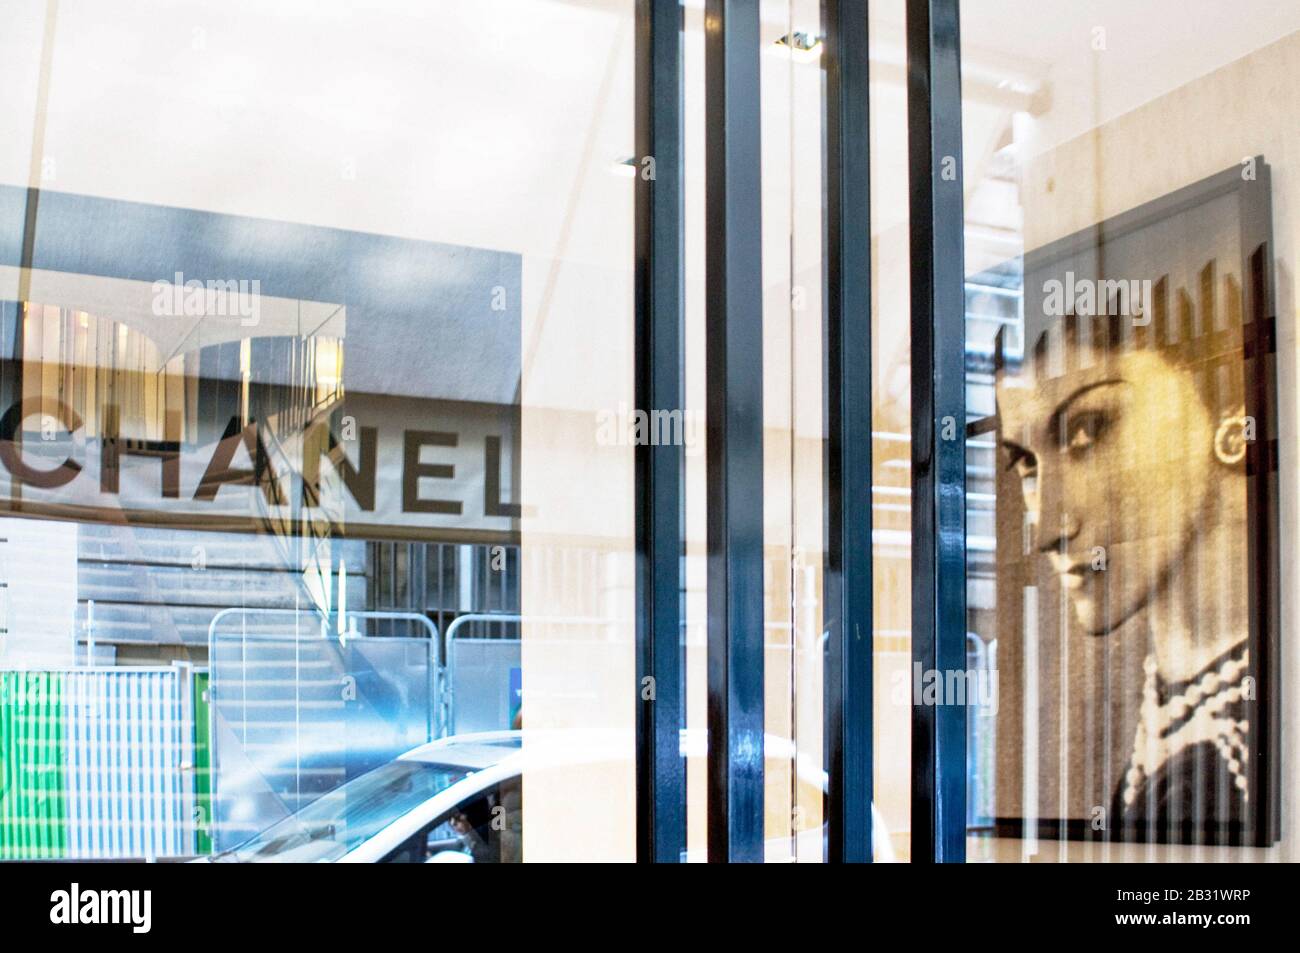 The Chanel store is a homage to the great Coco Chanel. It is like visiting a museum when in Paris. Stock Photo